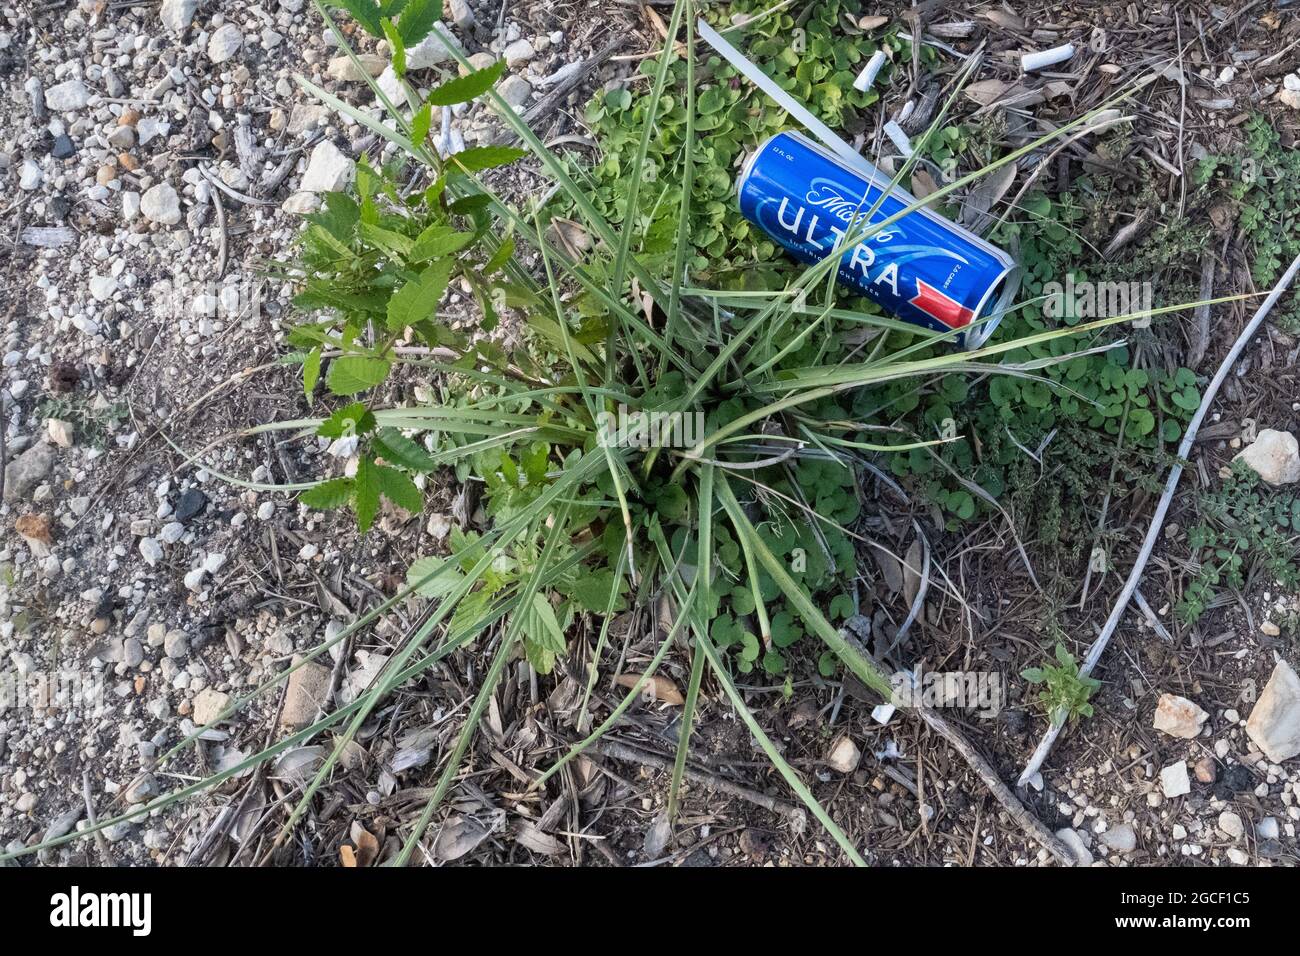 Discarded thrown away trash beer can and cigarette butt litter laying in green plant. Georgetown, Texas USA Stock Photo